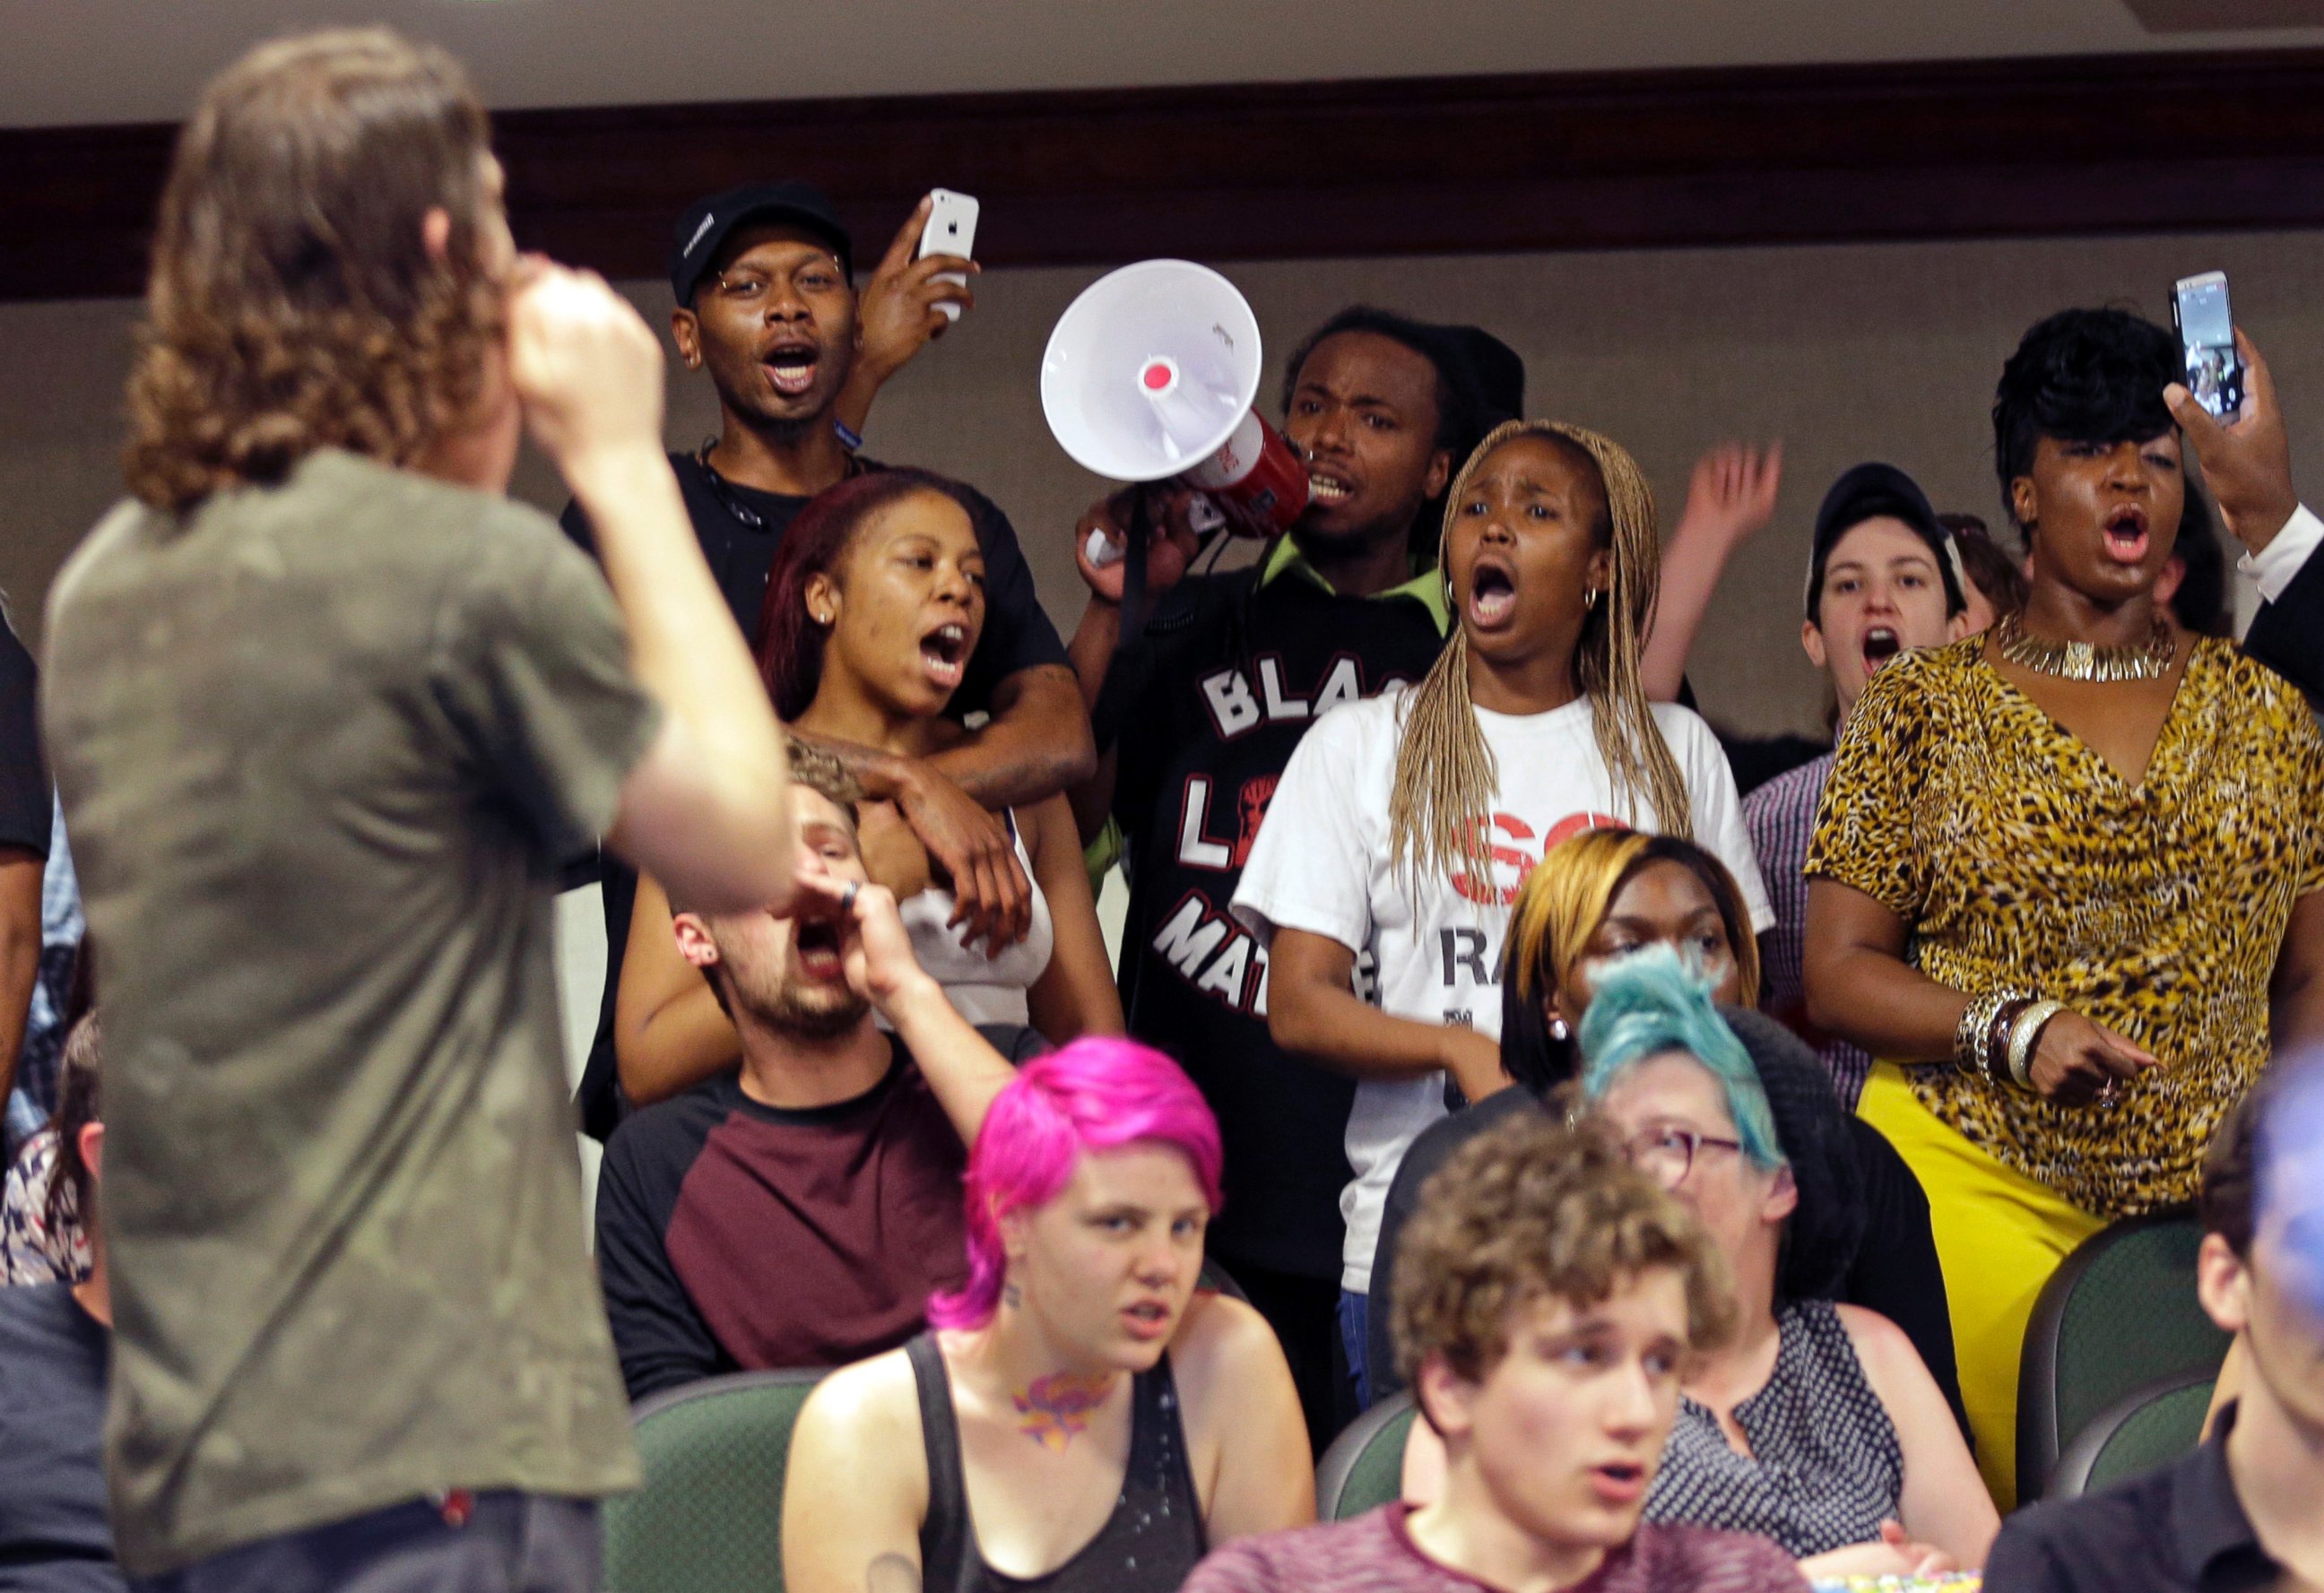 PHOTO: Protesters shout during a news conference about the shooting death of Walter Scott at city hall in North Charleston, S.C., April 8, 2015.